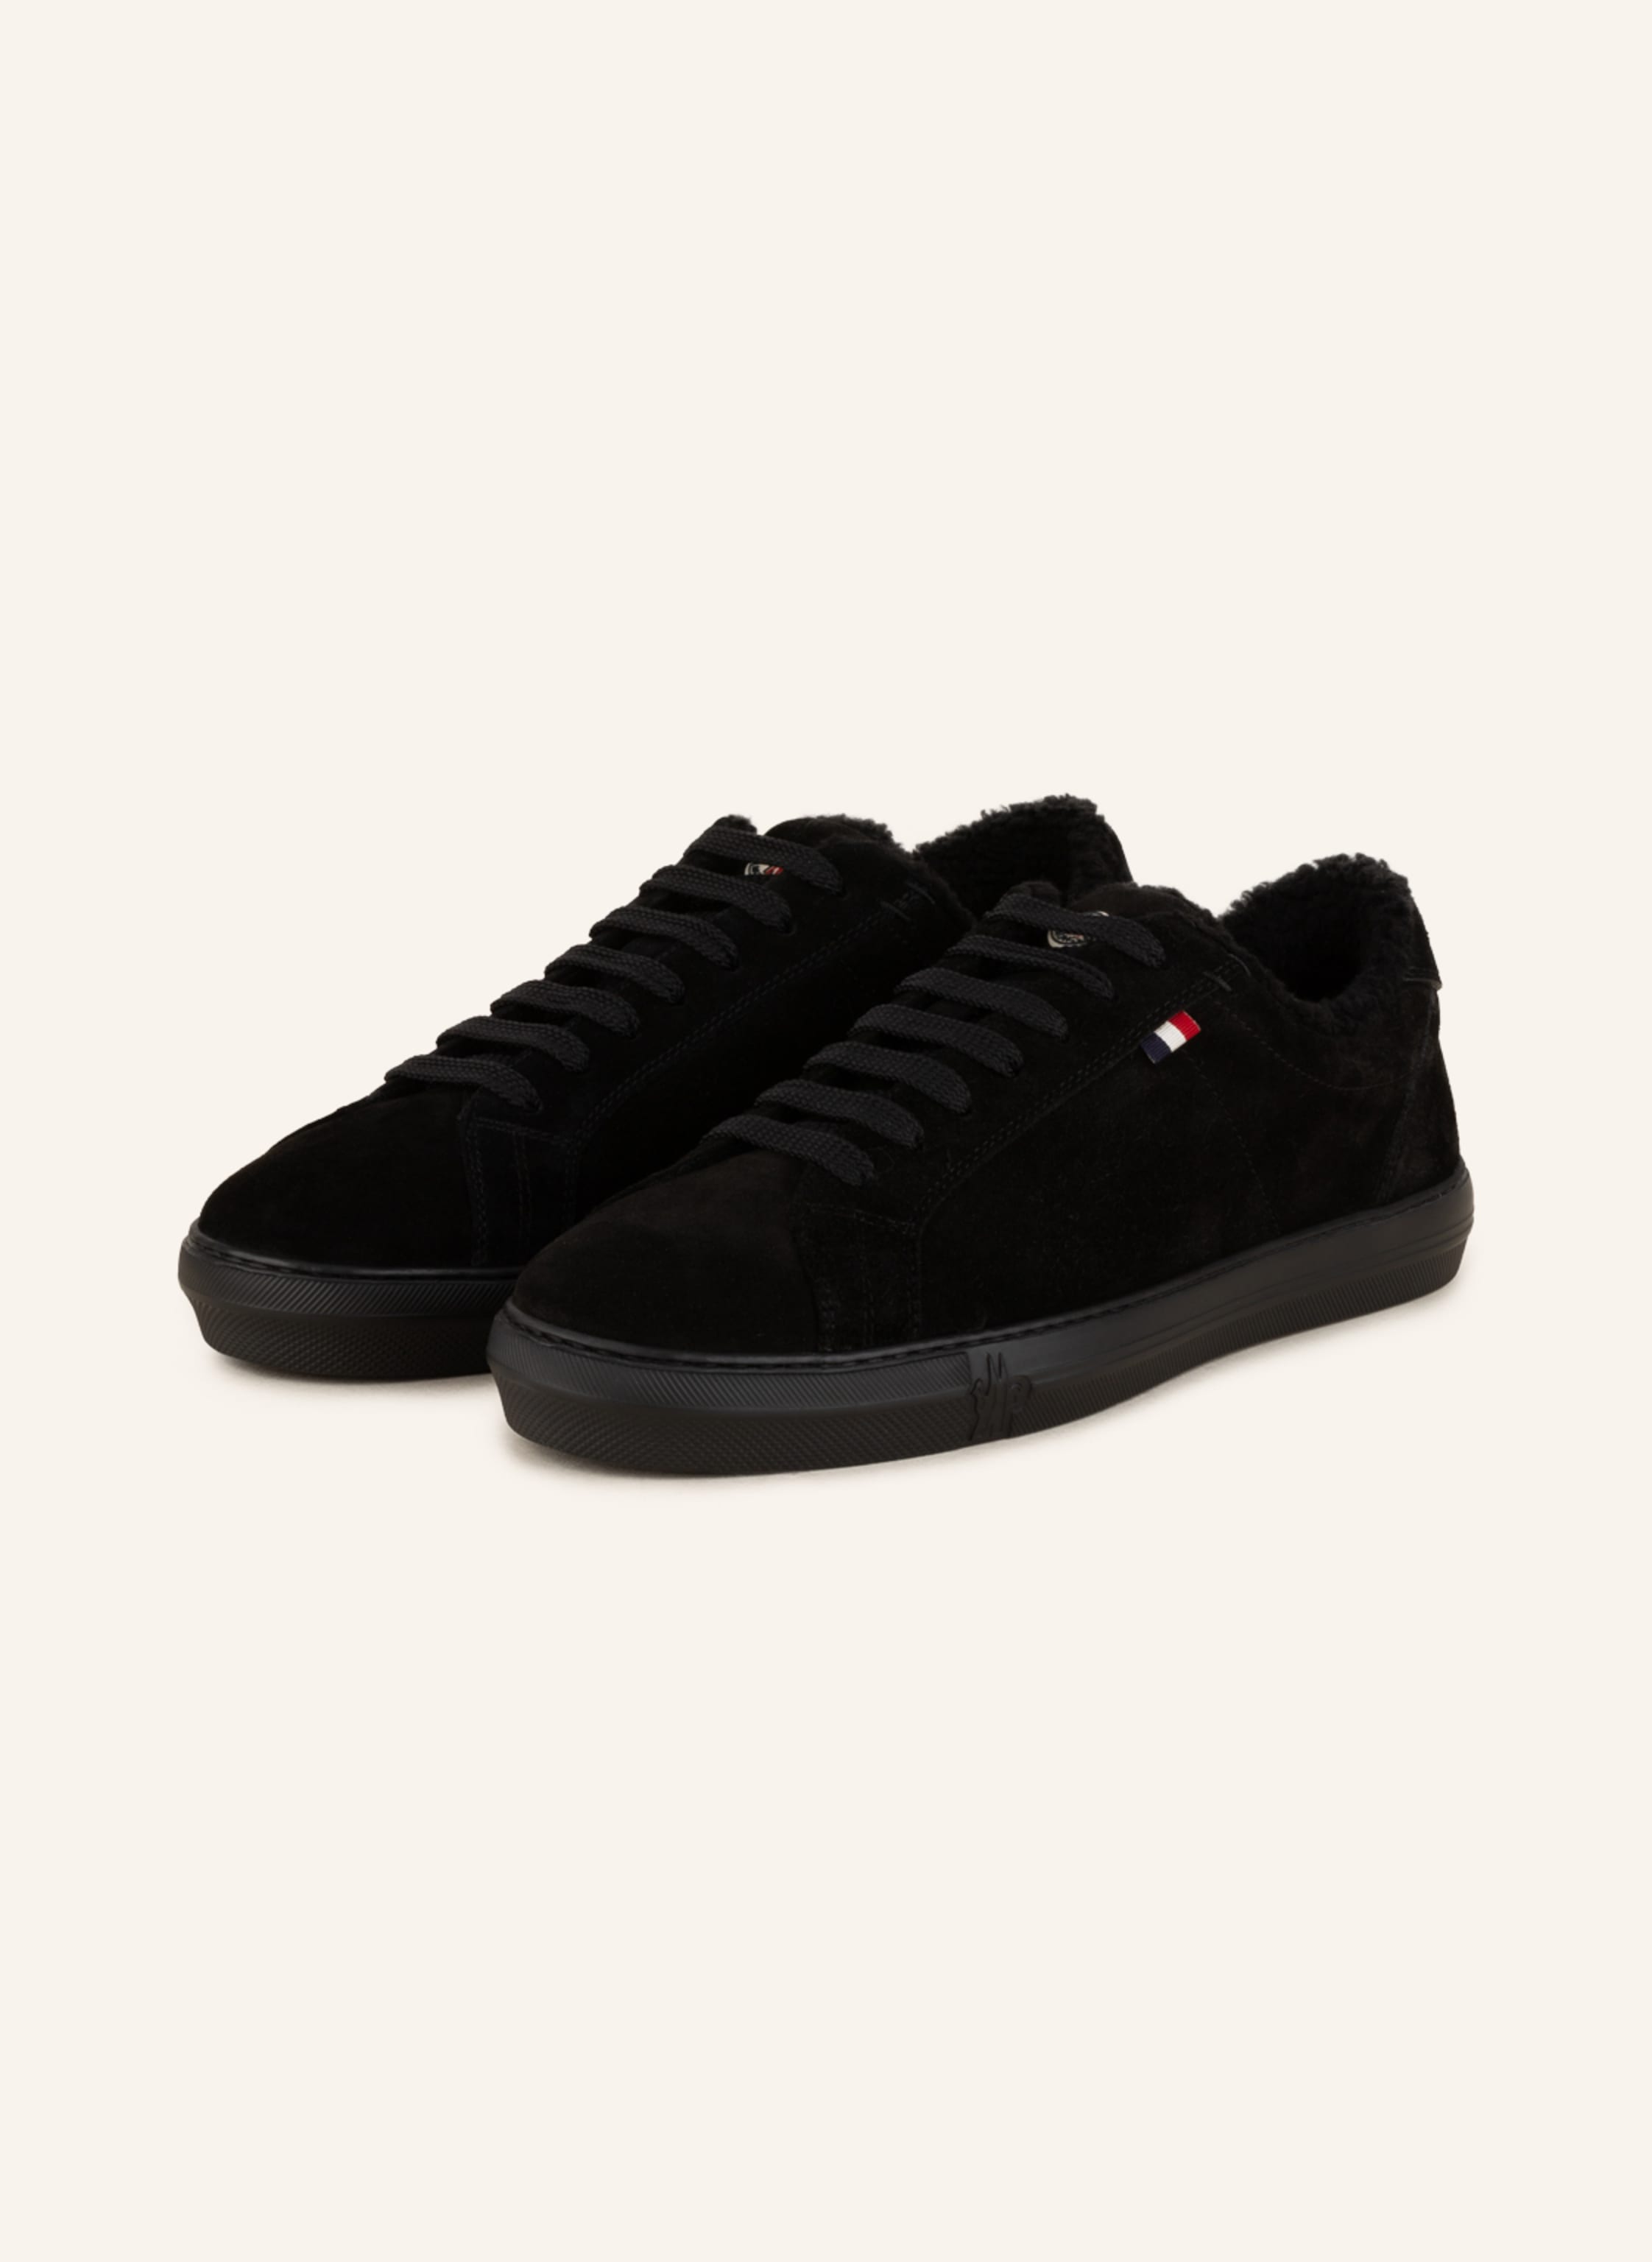 Moncler Low-Top Sneakers MONACO suede online shopping - mybudapester.com